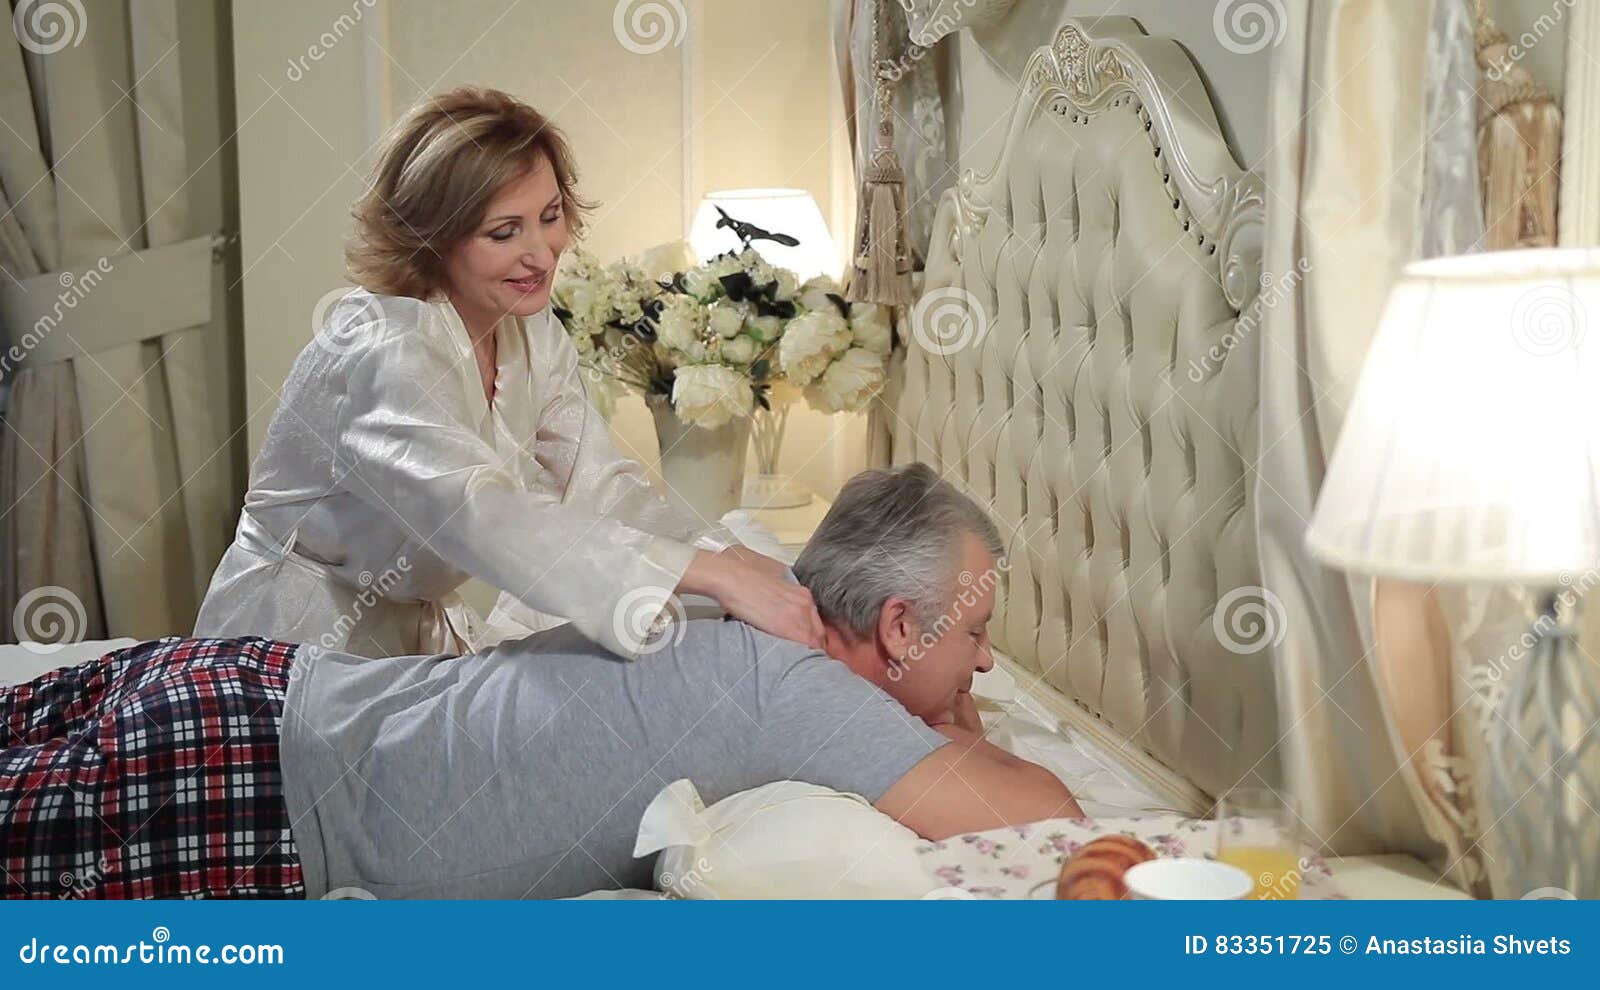 Mature Woman Giving Massage To Senior Man in Bed Stock Video